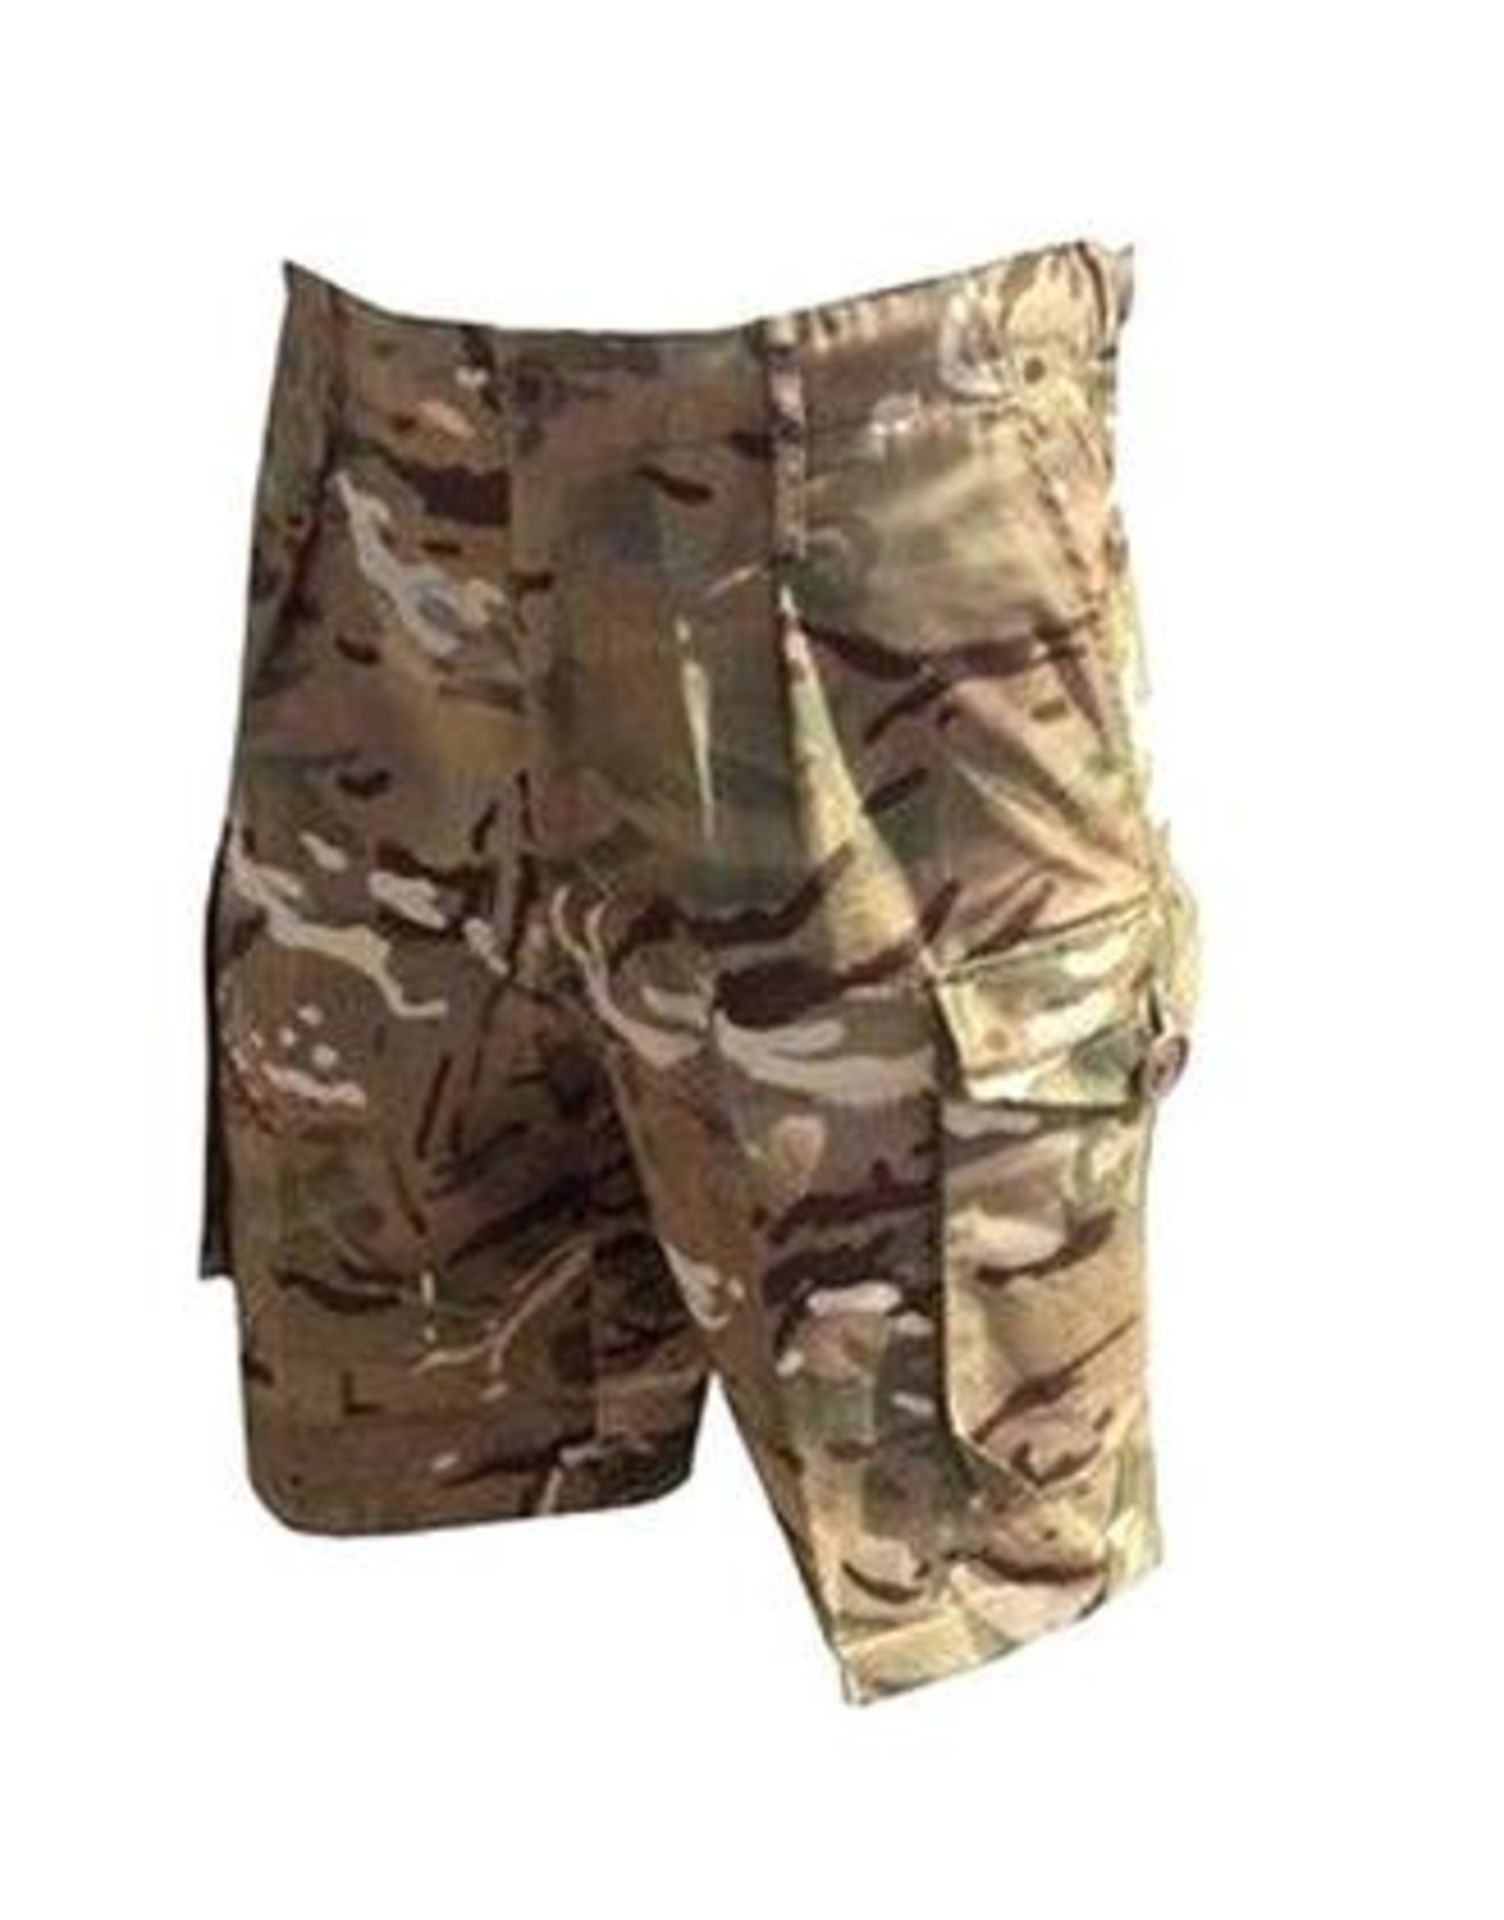 PACK OF 5 - MTP SHORTS - SIZE 96CM - BRAND NEW